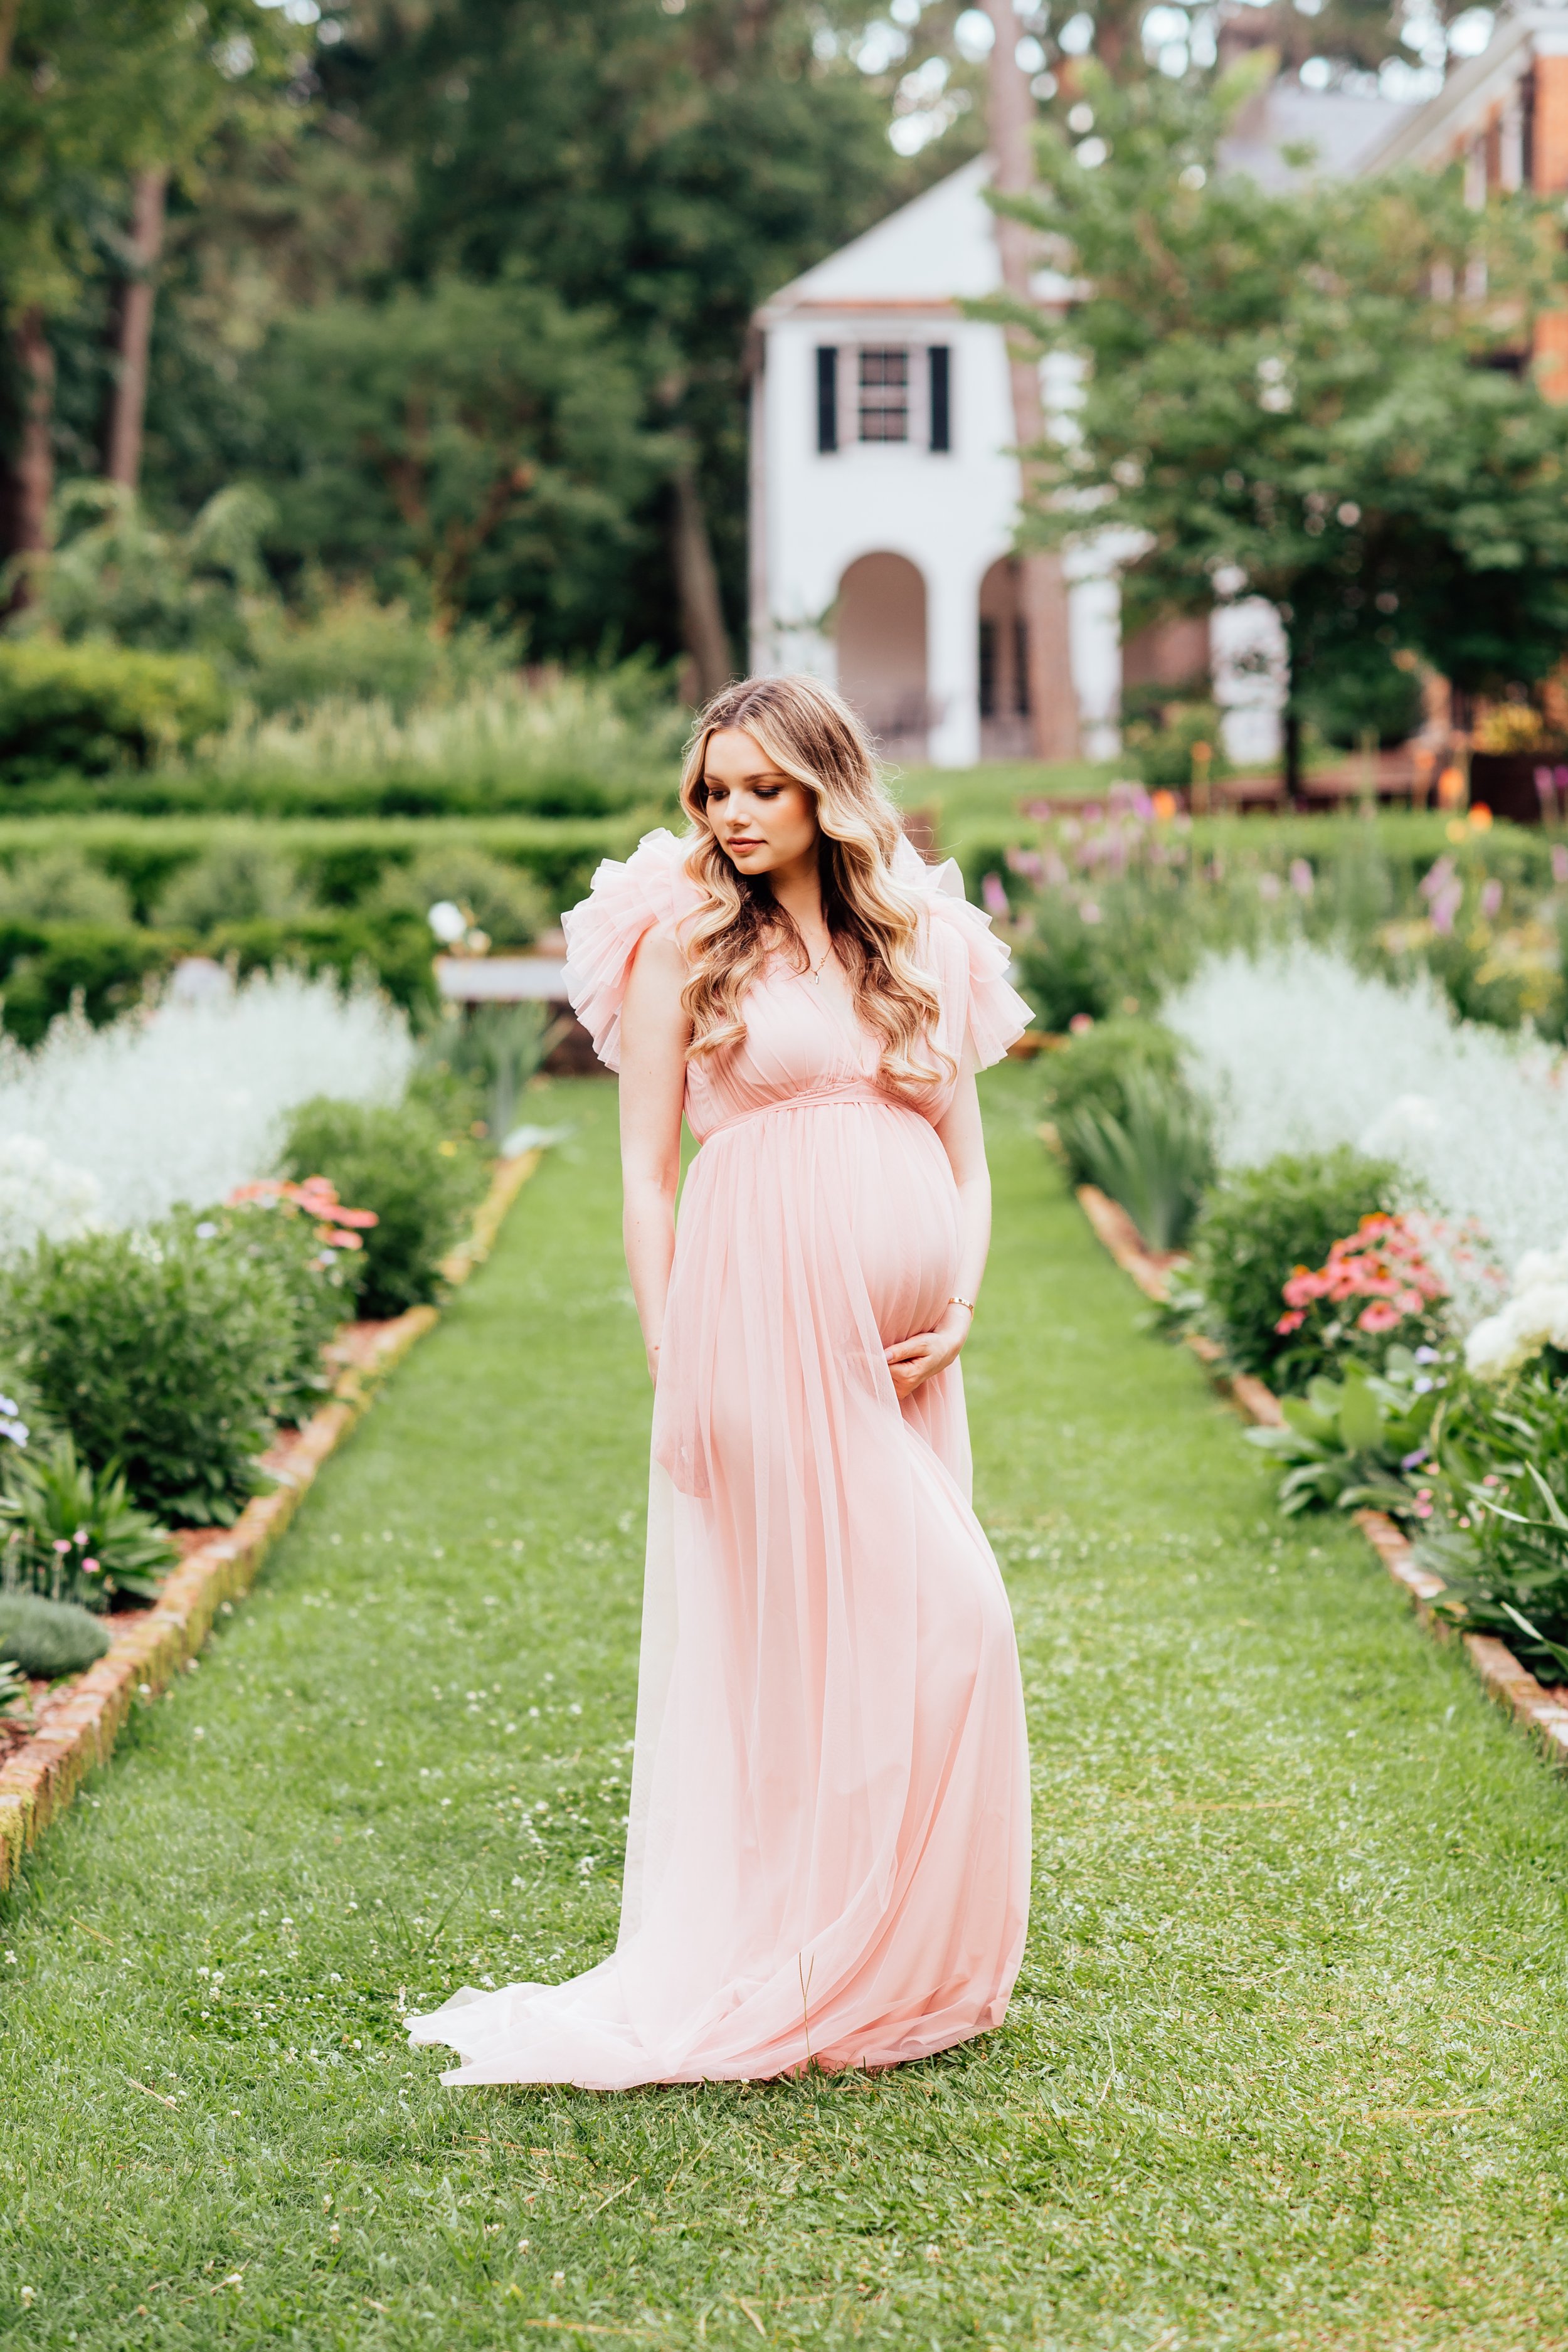 Pregnant woman in pink gown